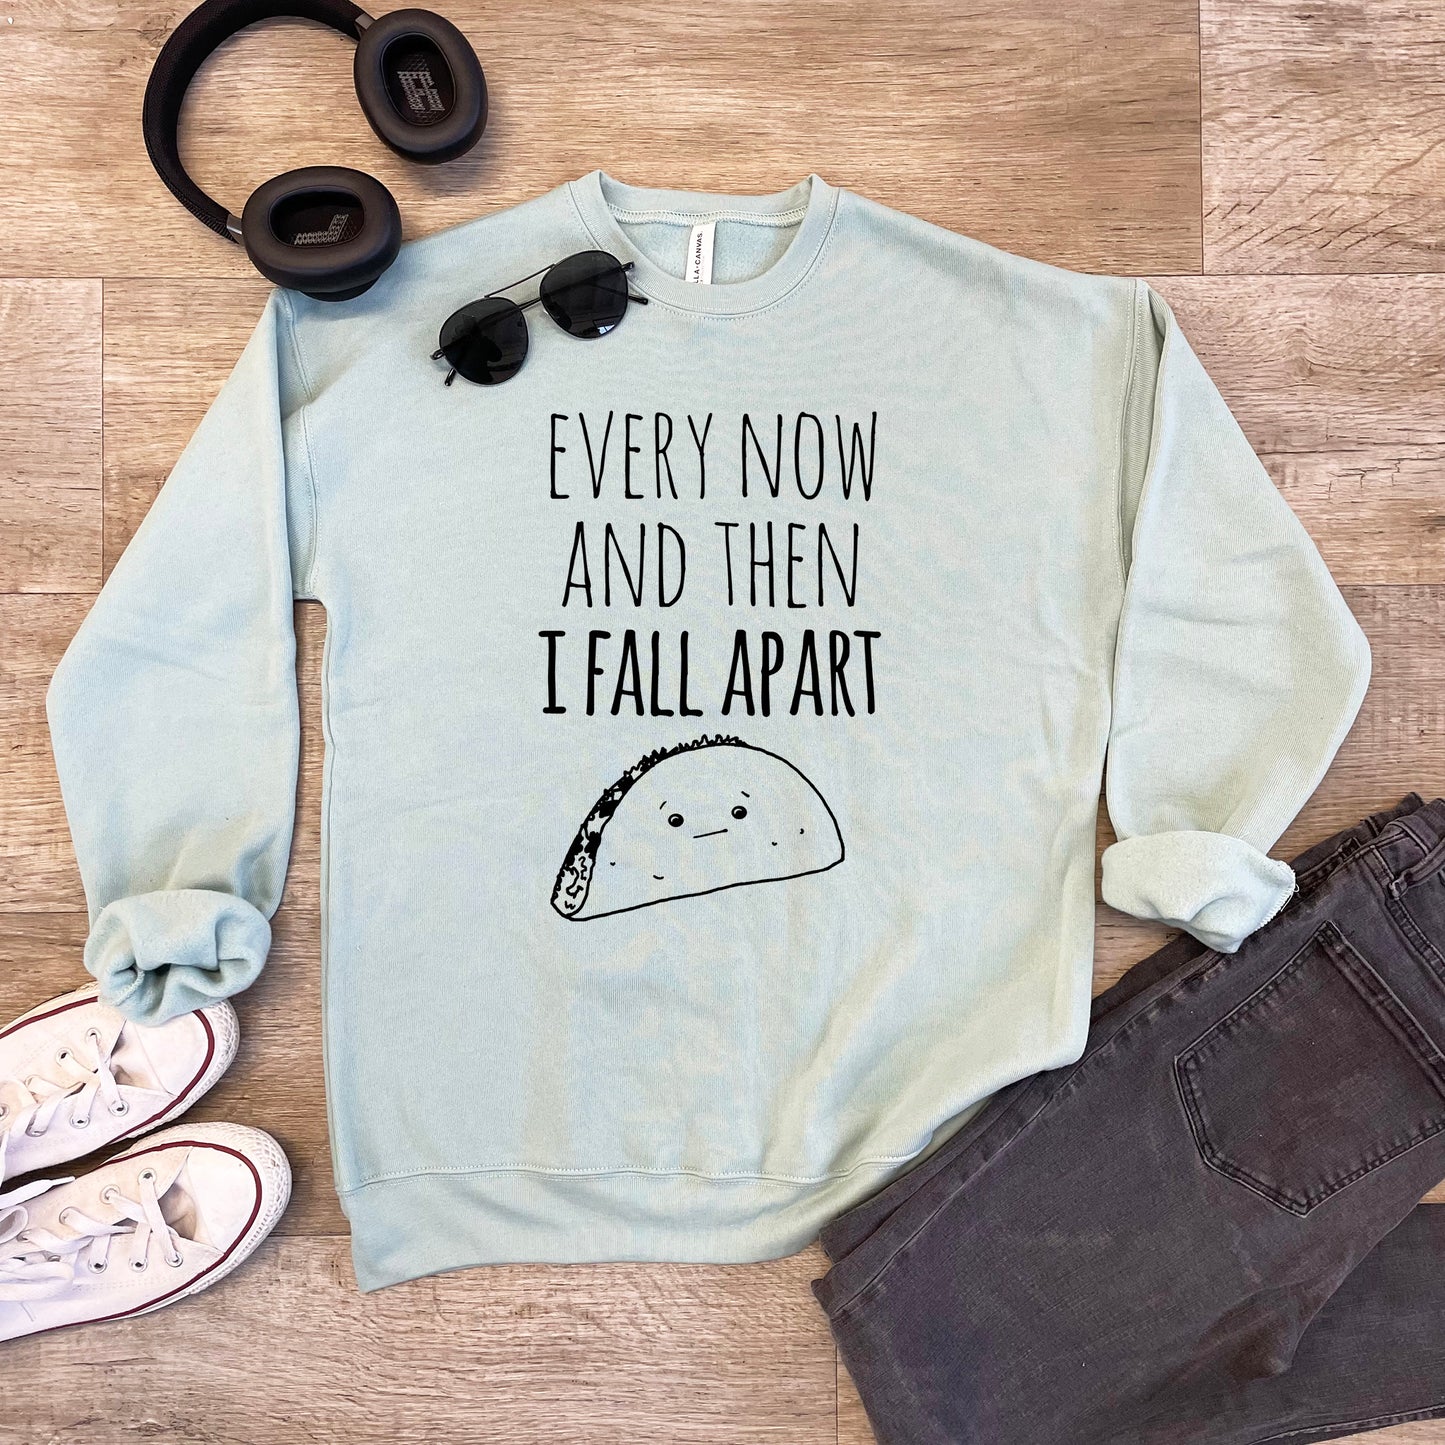 Every Now And Then I Fall Apart (Taco) - Unisex Sweatshirt - Heather Gray or Dusty Blue